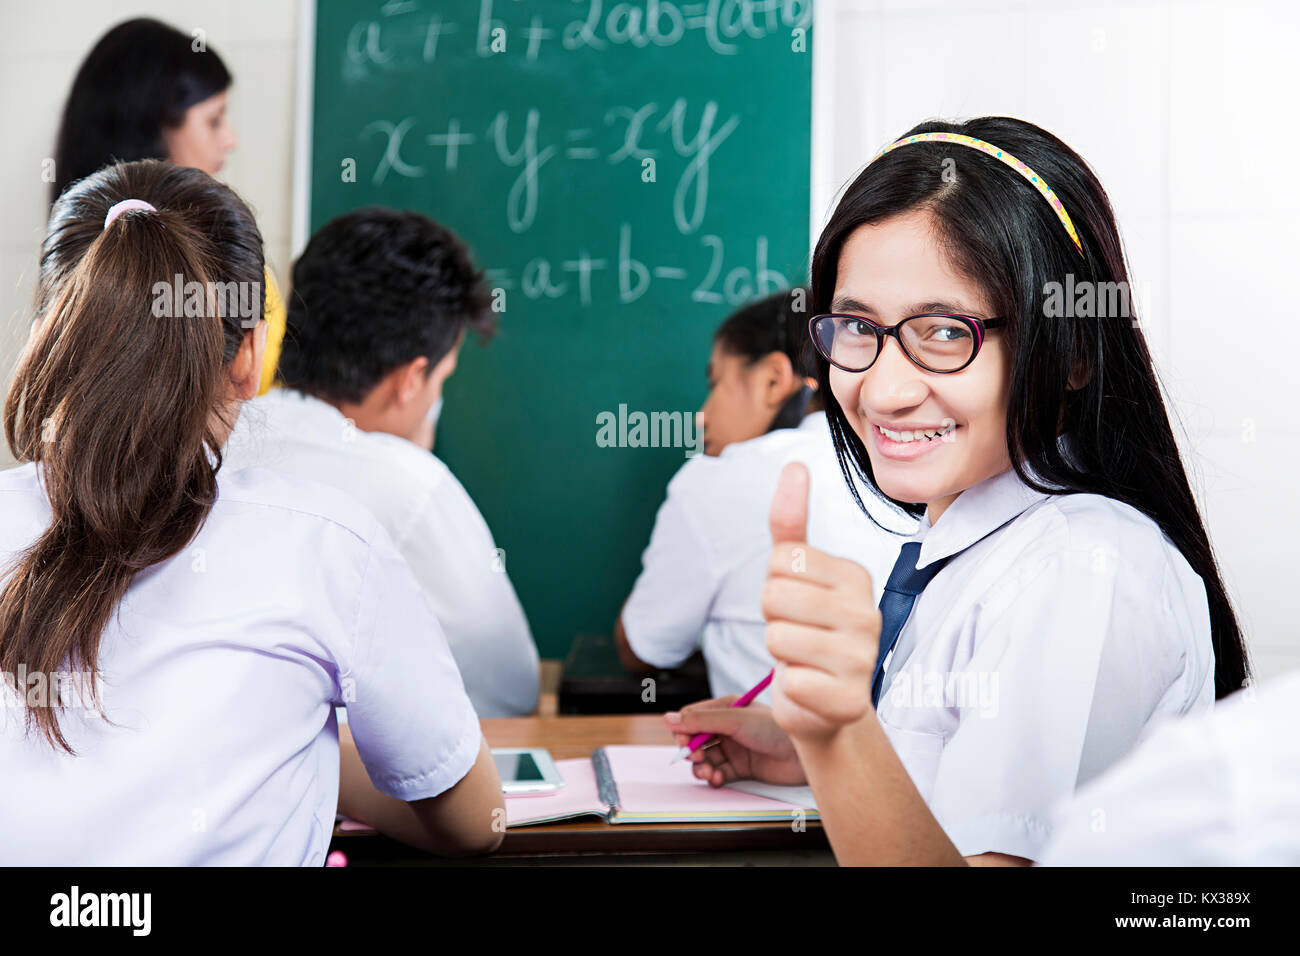 Indian School Students Teenager Girl Showing Thumbsup Study Education Class Stock Photo